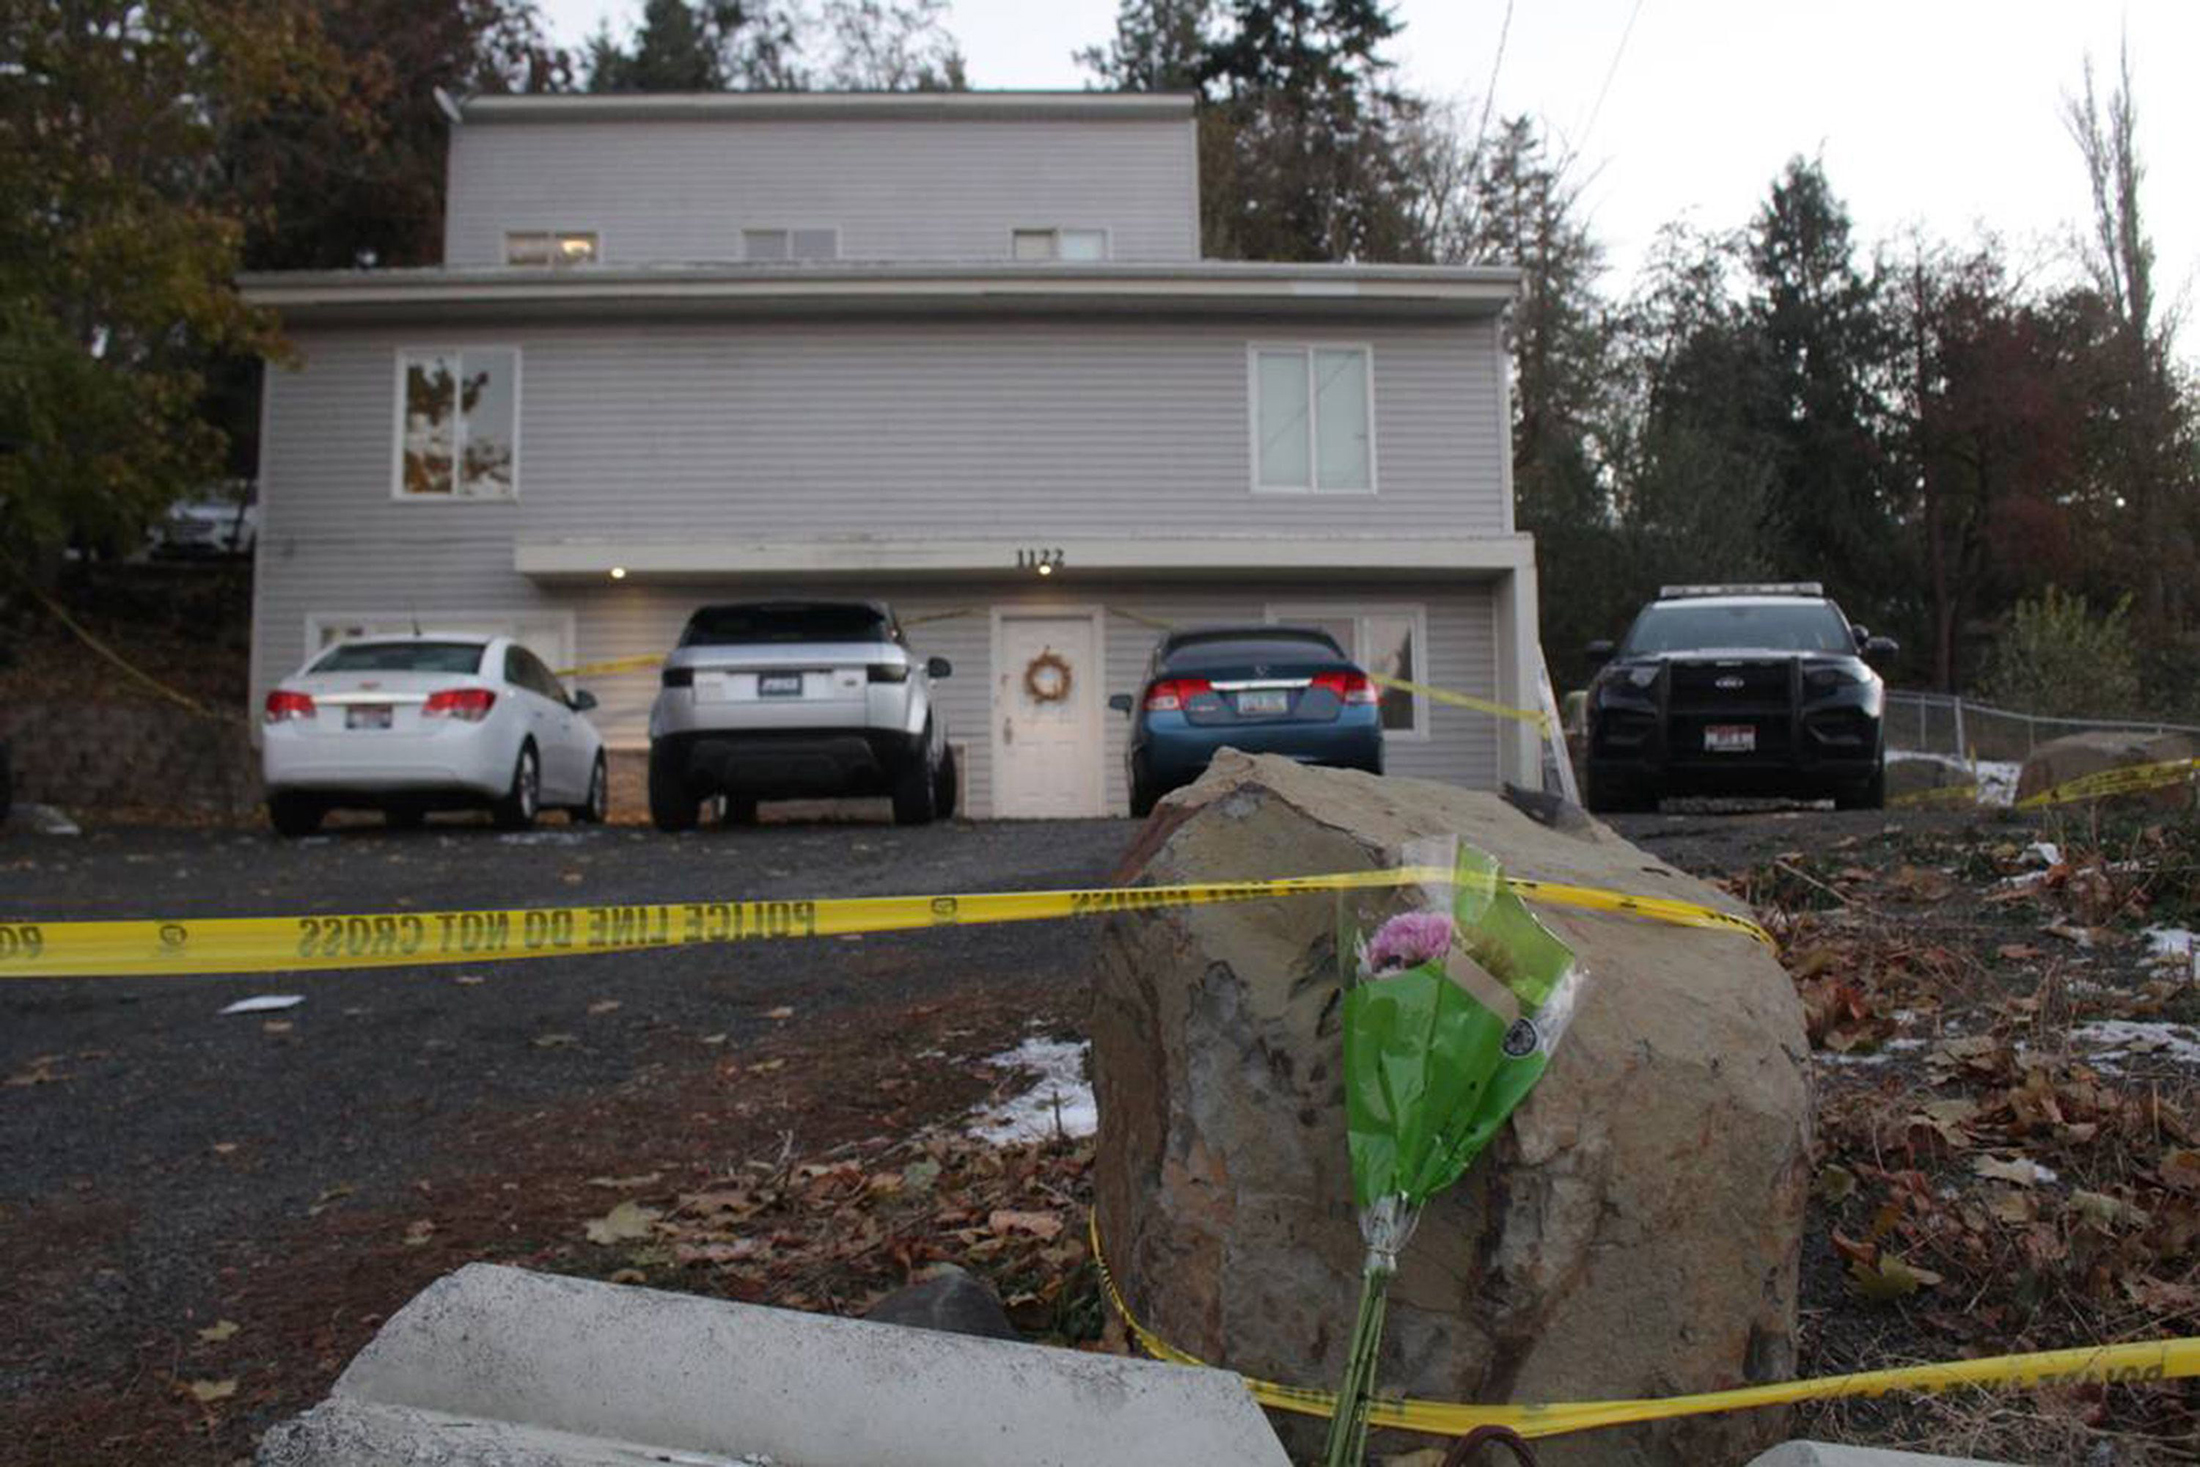 Idaho Murders Update: Owner of King Road Property #39 Cooperating #39 with Police